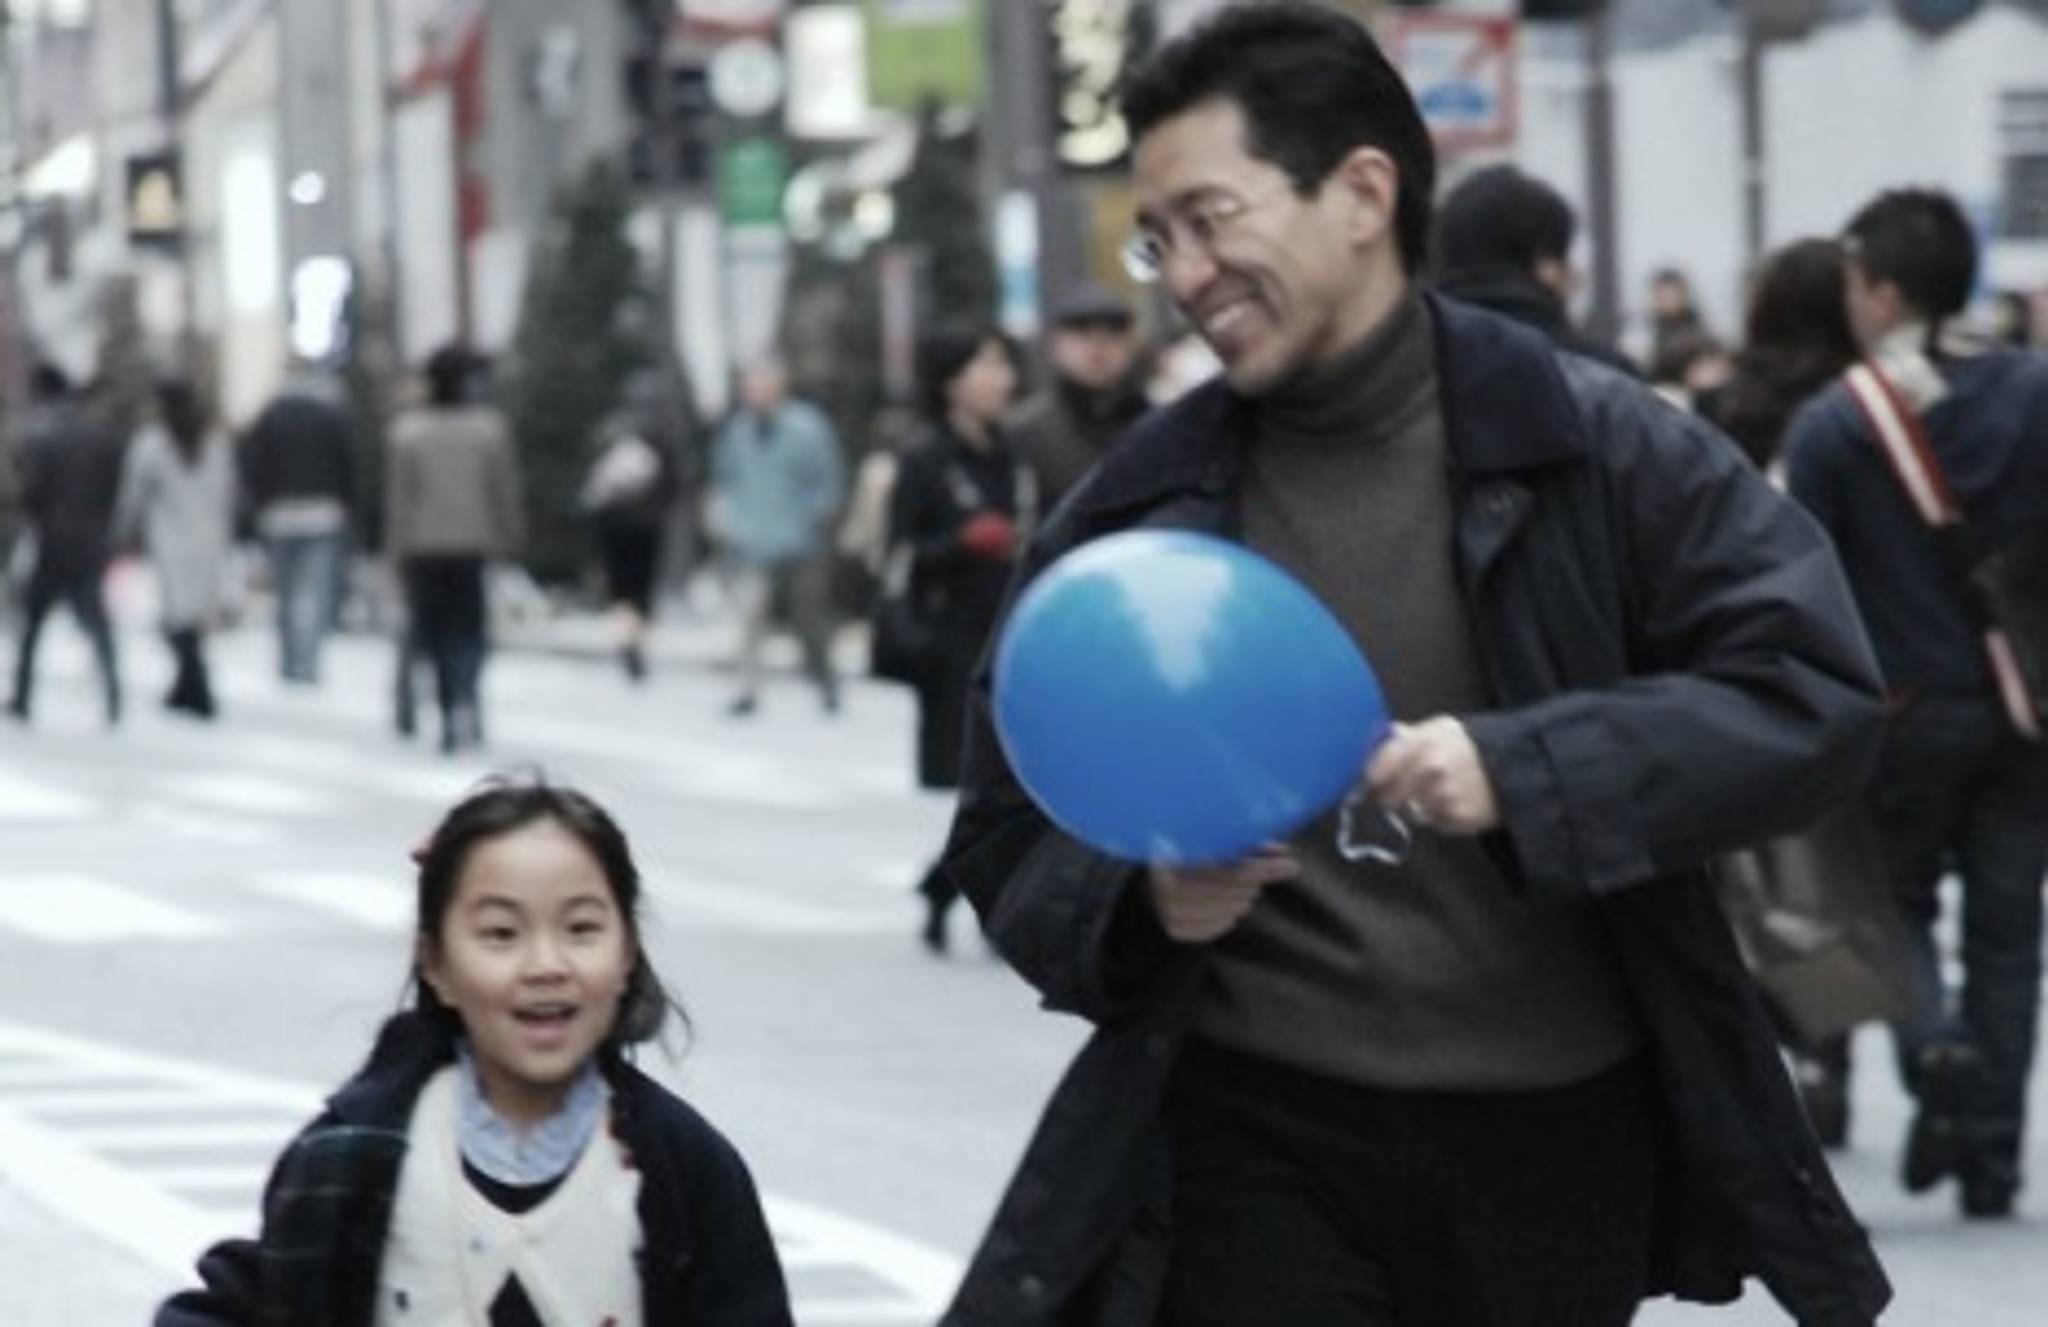 Japan wants new fathers to step up